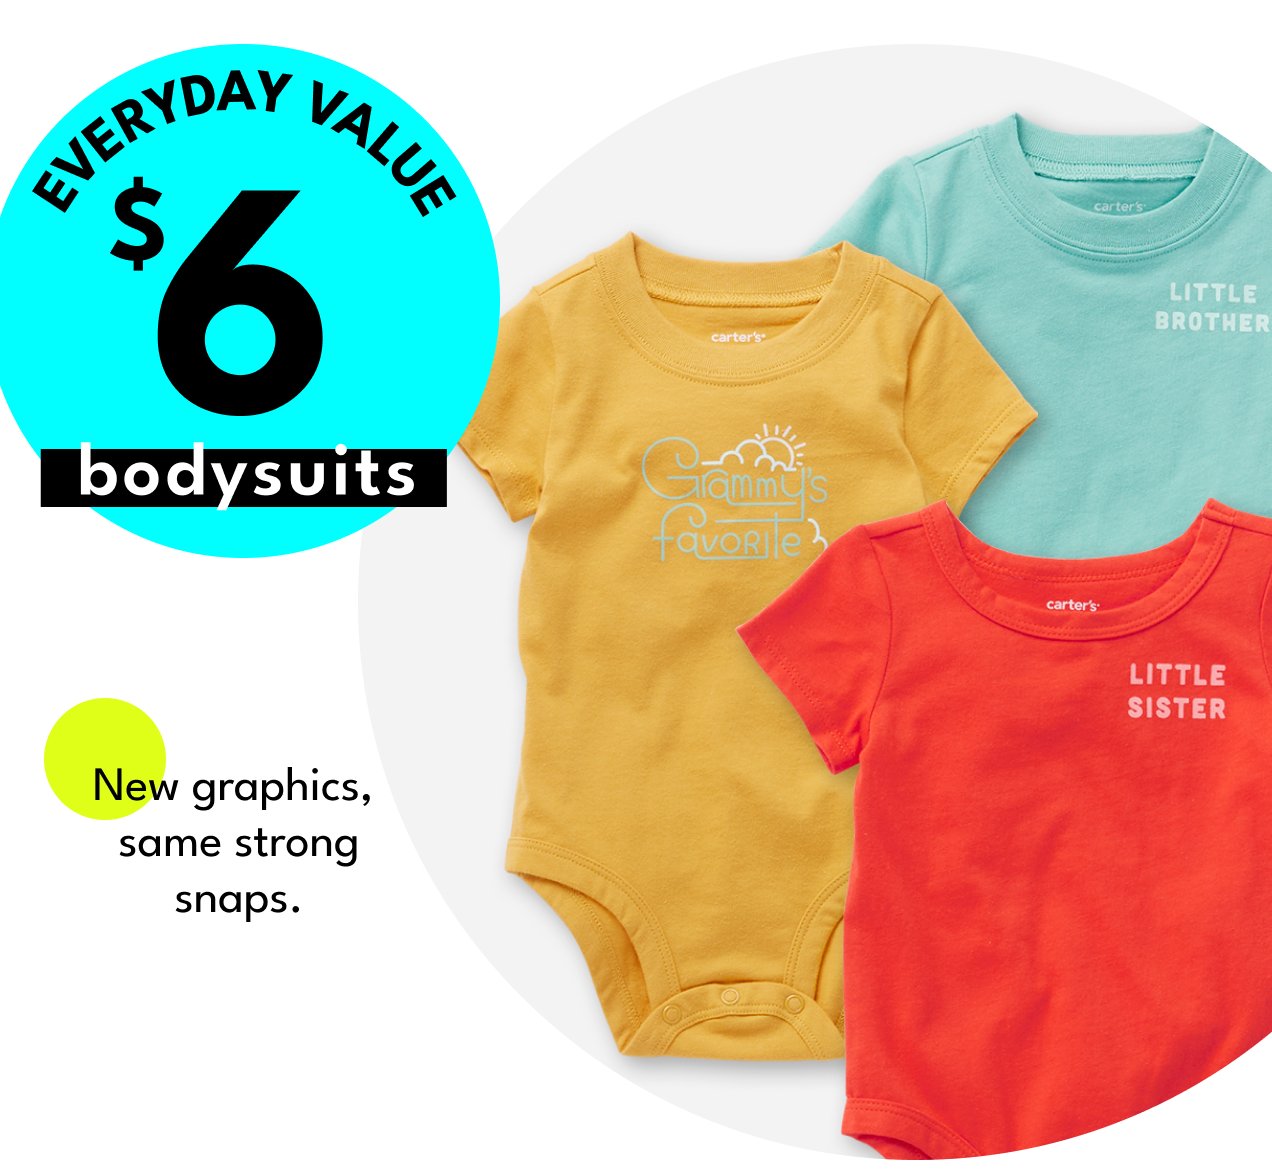 EVERYDAY VALUE | \\$6 bodysuits | New graphics, same strong snaps.